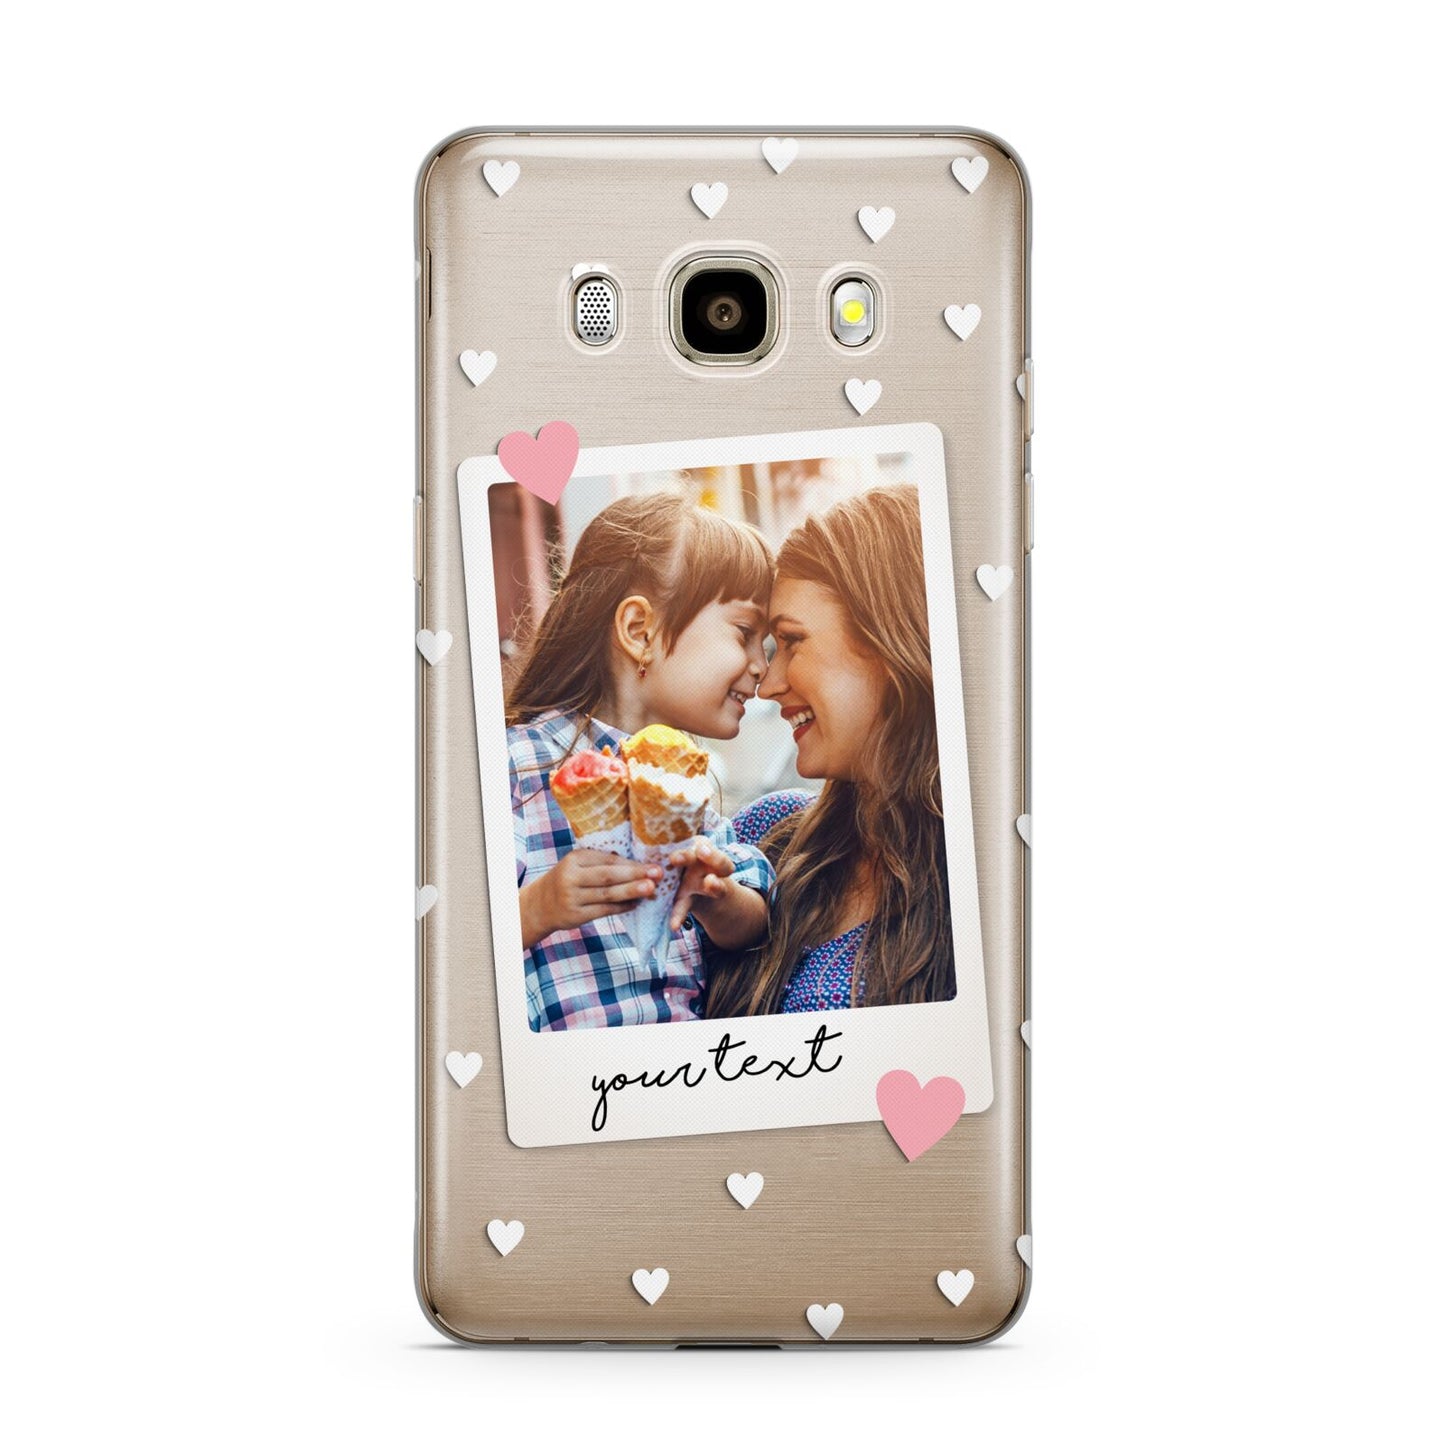 Personalised Photo Love Hearts Samsung Galaxy J7 2016 Case on gold phone